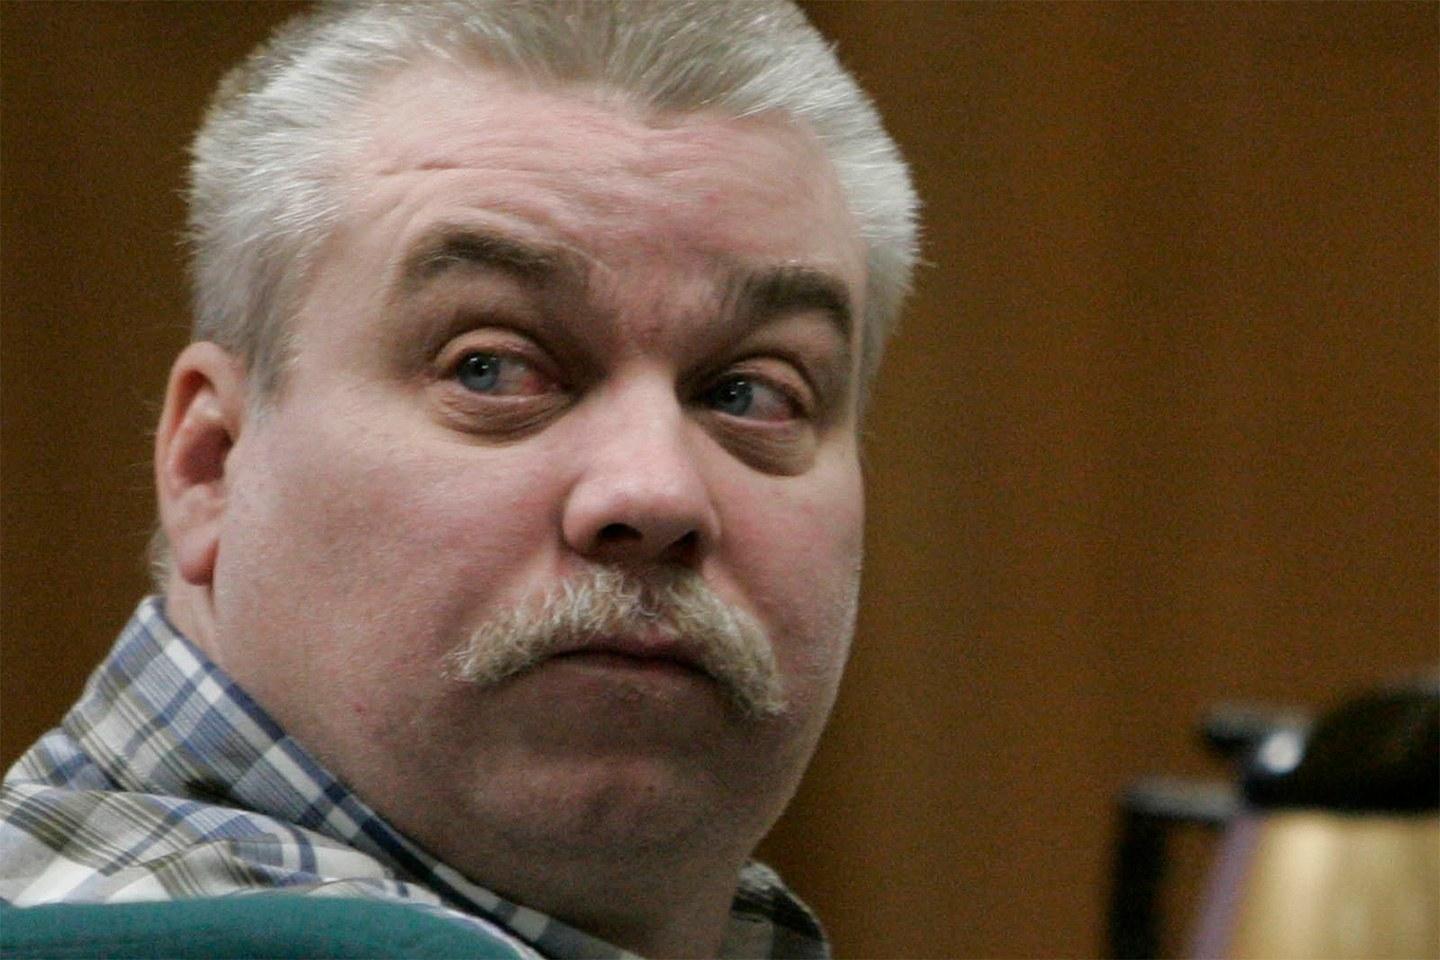 making-a-murderer-rival-series-showing-different-side-to-steven-avery-case-announced-the